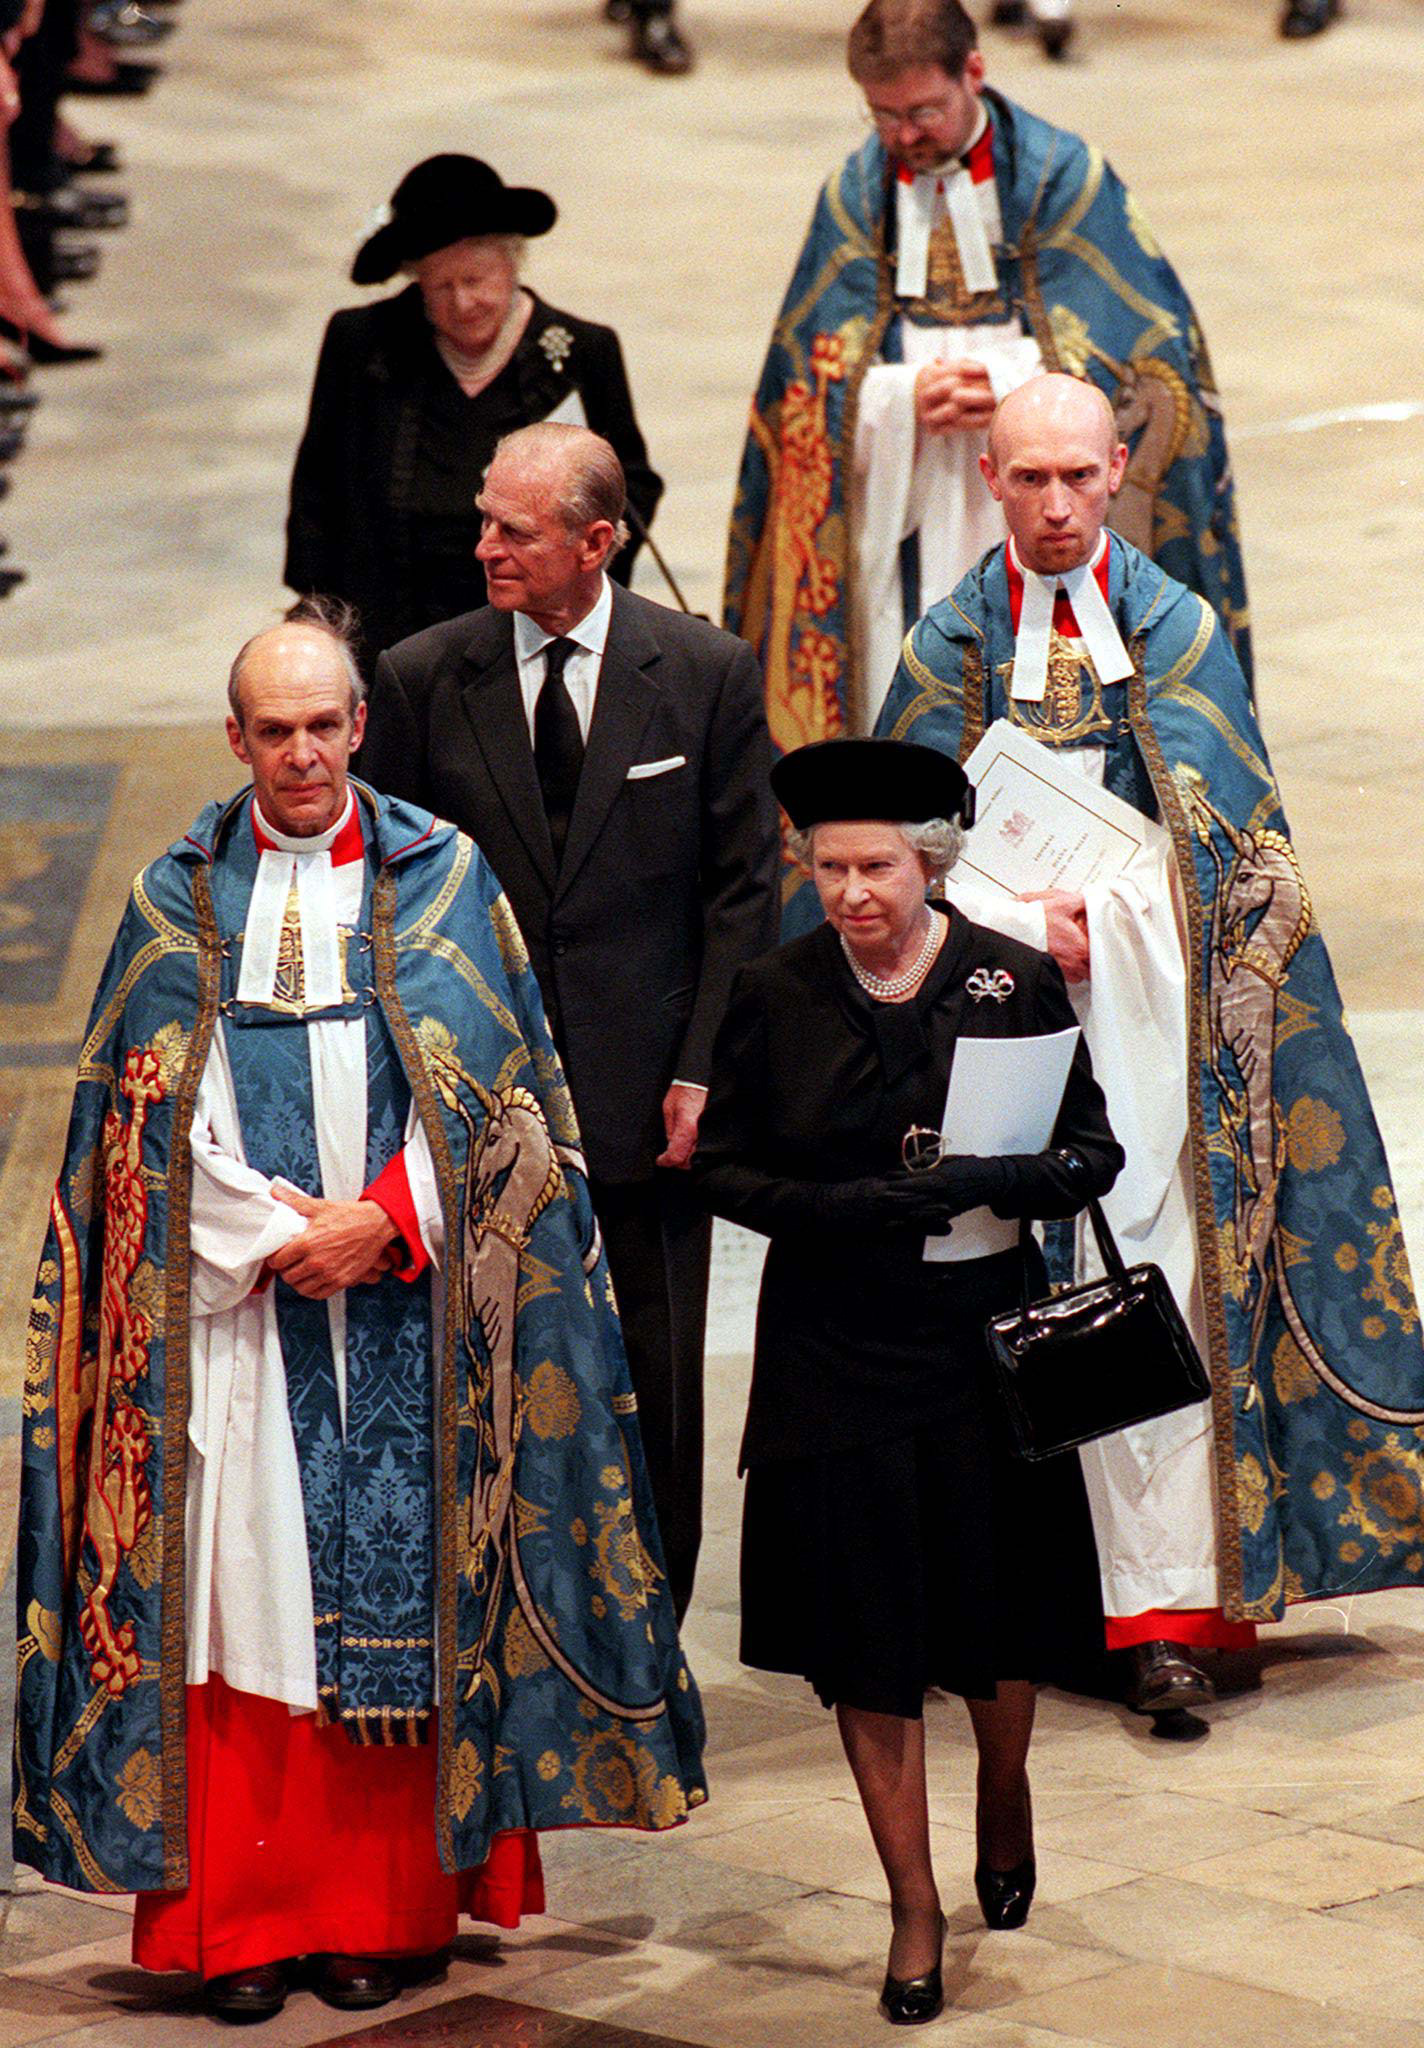 <p>A somber Queen Elizabeth II was joined by husband Prince Philip and mother Queen Elizabeth the Queen Mother as she arrived at Westminster Abbey in London for <a href="https://www.wonderwall.com/celebrity/royal-funerals-through-the-decades-photos-princess-diana-margaret-queen-elizabeth-queen-mother-king-george-prince-philip-monarchs-more-445035.gallery?photoId=445094">the funeral</a> of Princess Diana on Sept. 6, 1997.</p>